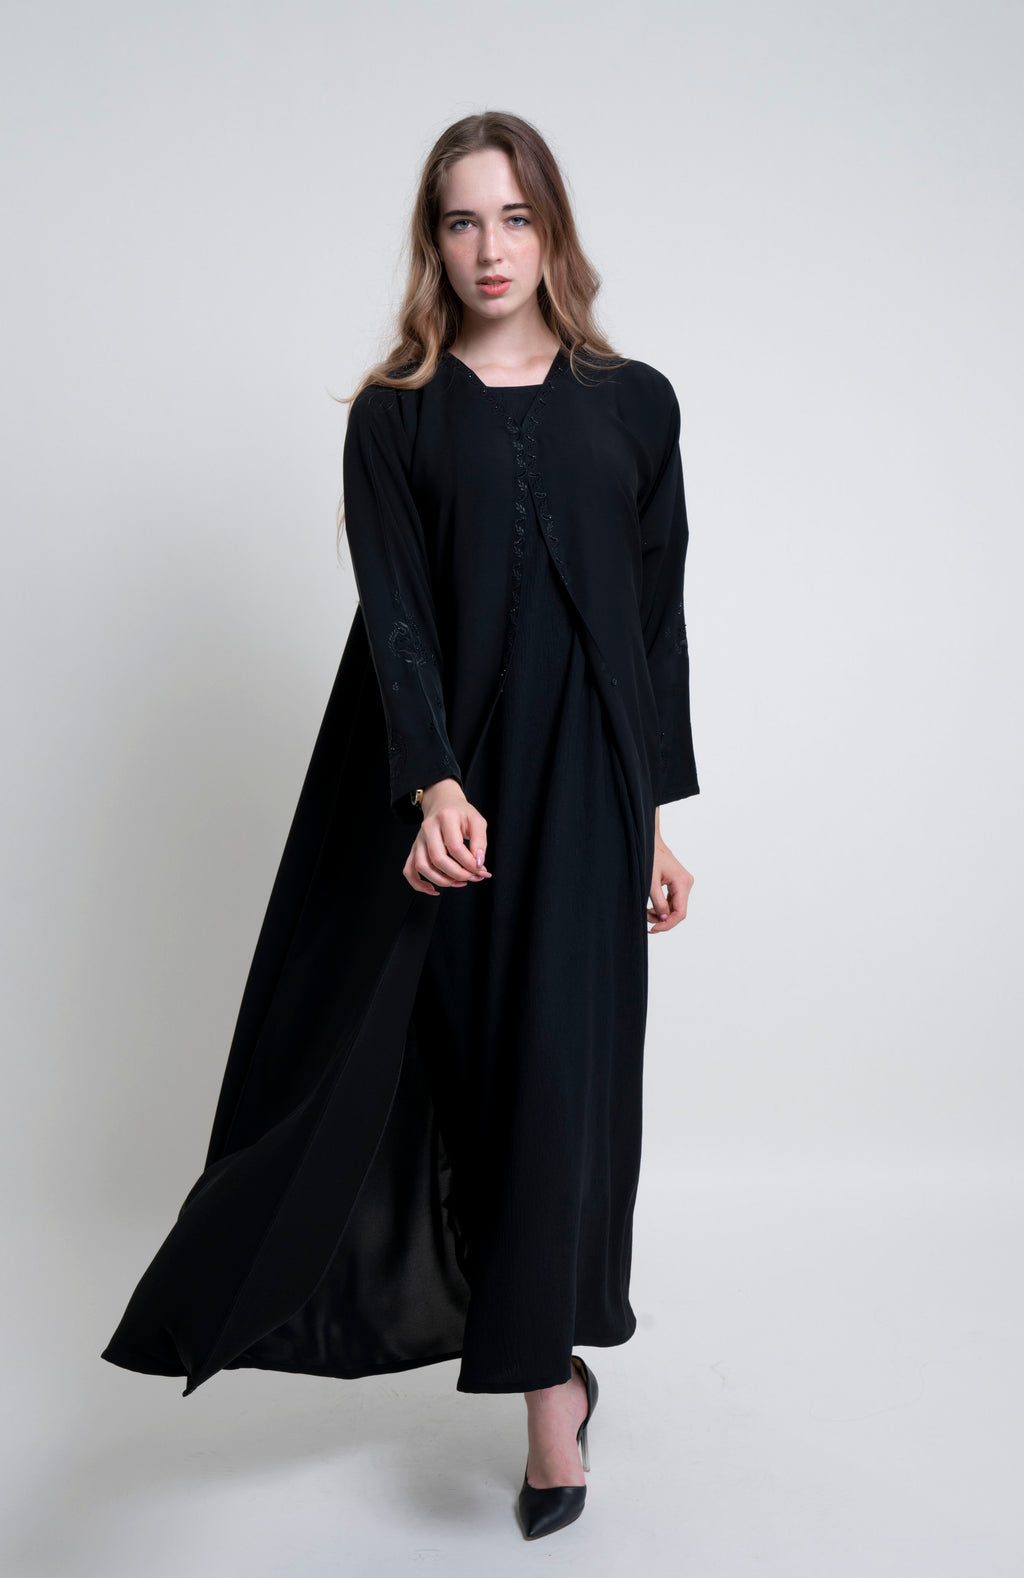 Flow of black abaya with Embroidered Neckline and Floral Motif Sleeves